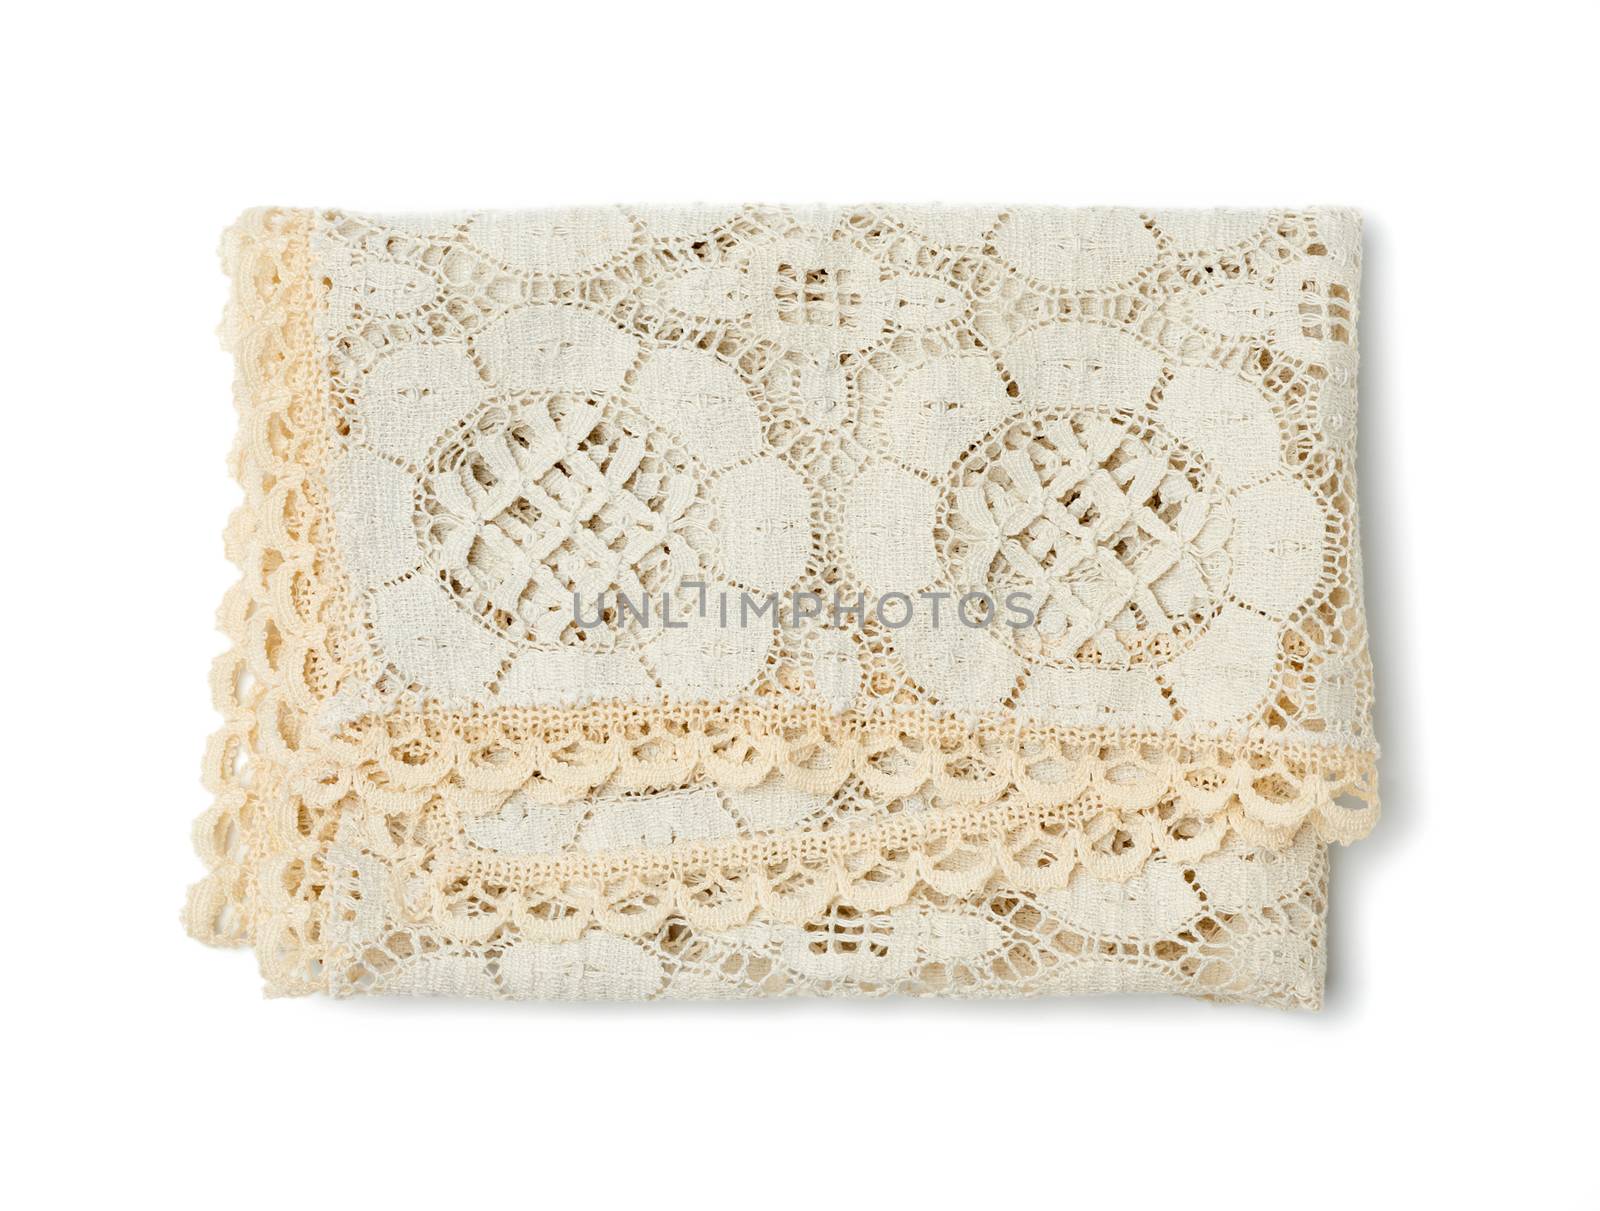 folded beige lace tablecloth and isolated on a white background by ndanko